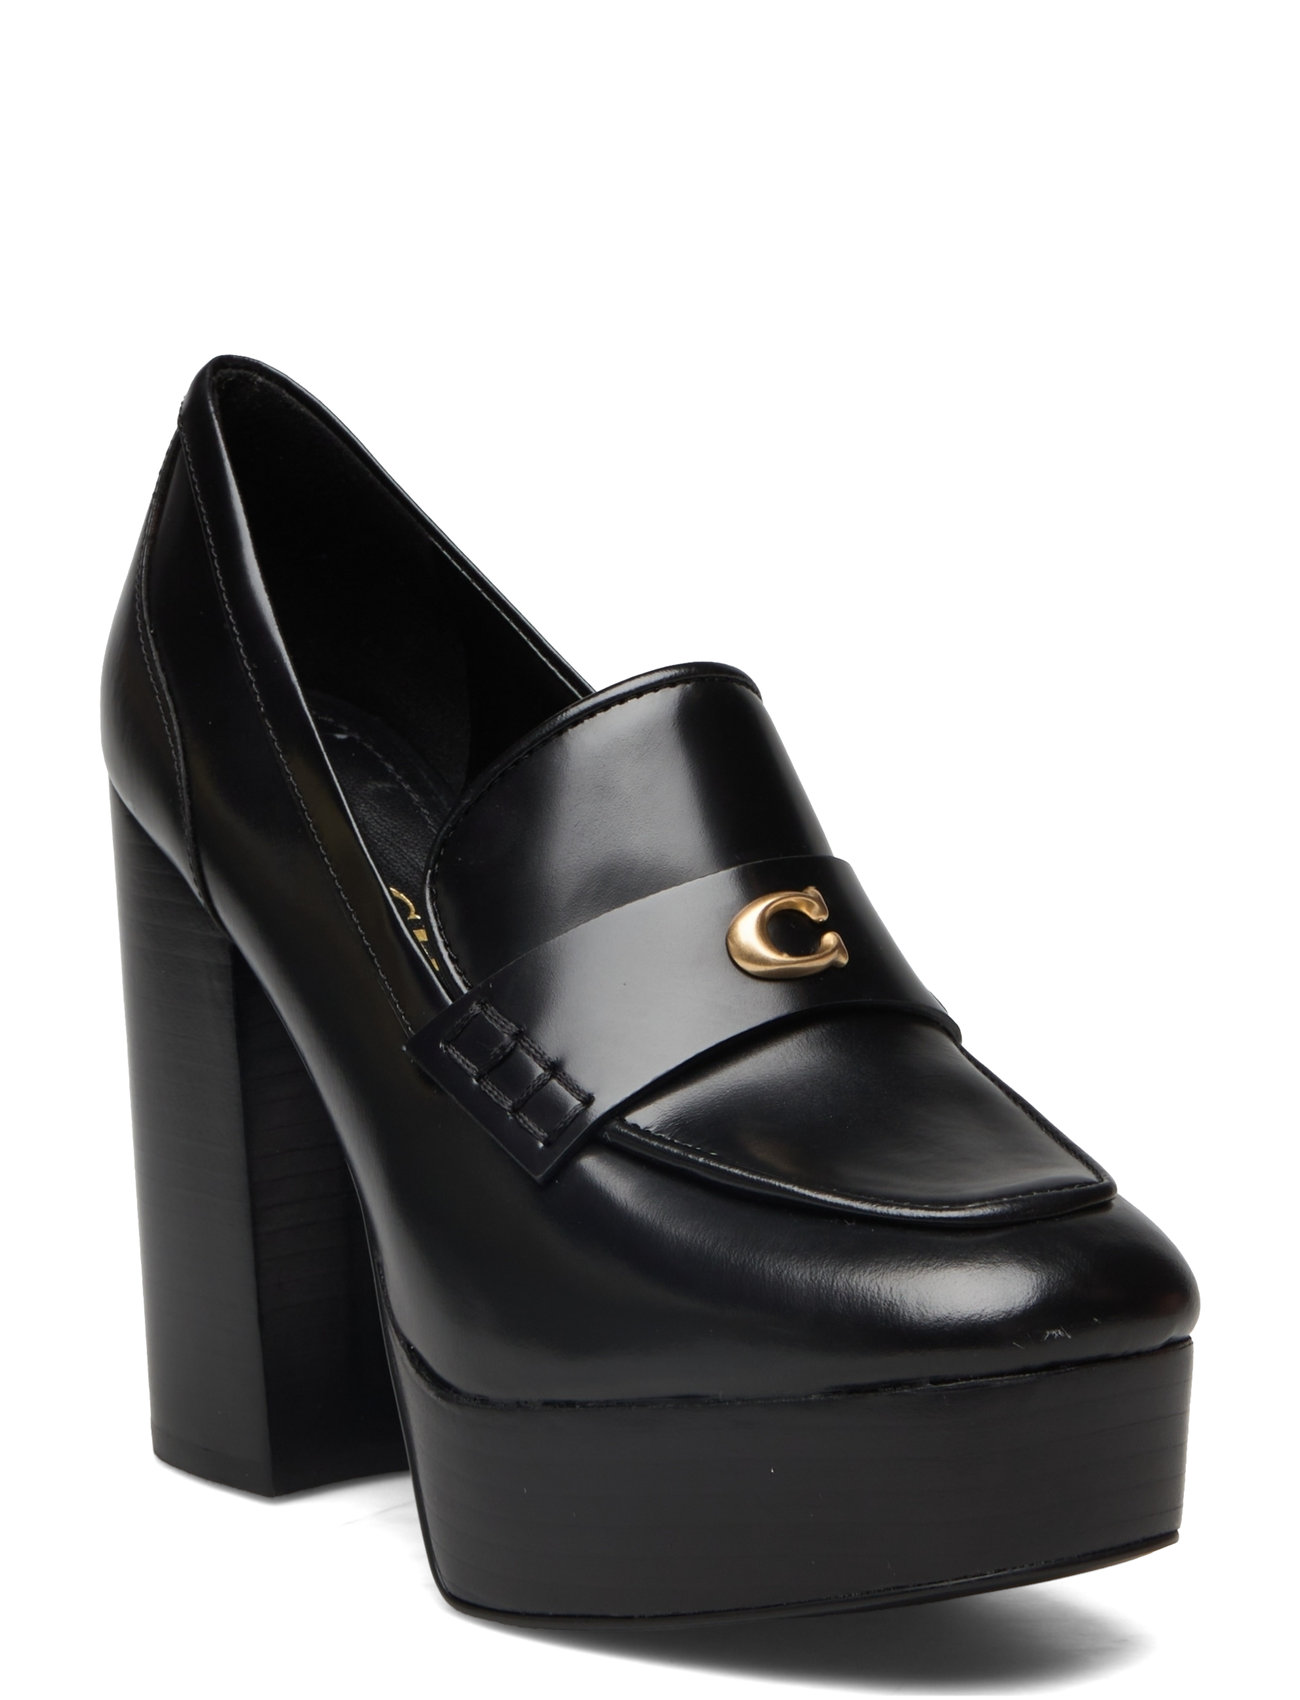 Ilyse Leather Loafer Shoes Heels Heeled Loafers Black Coach